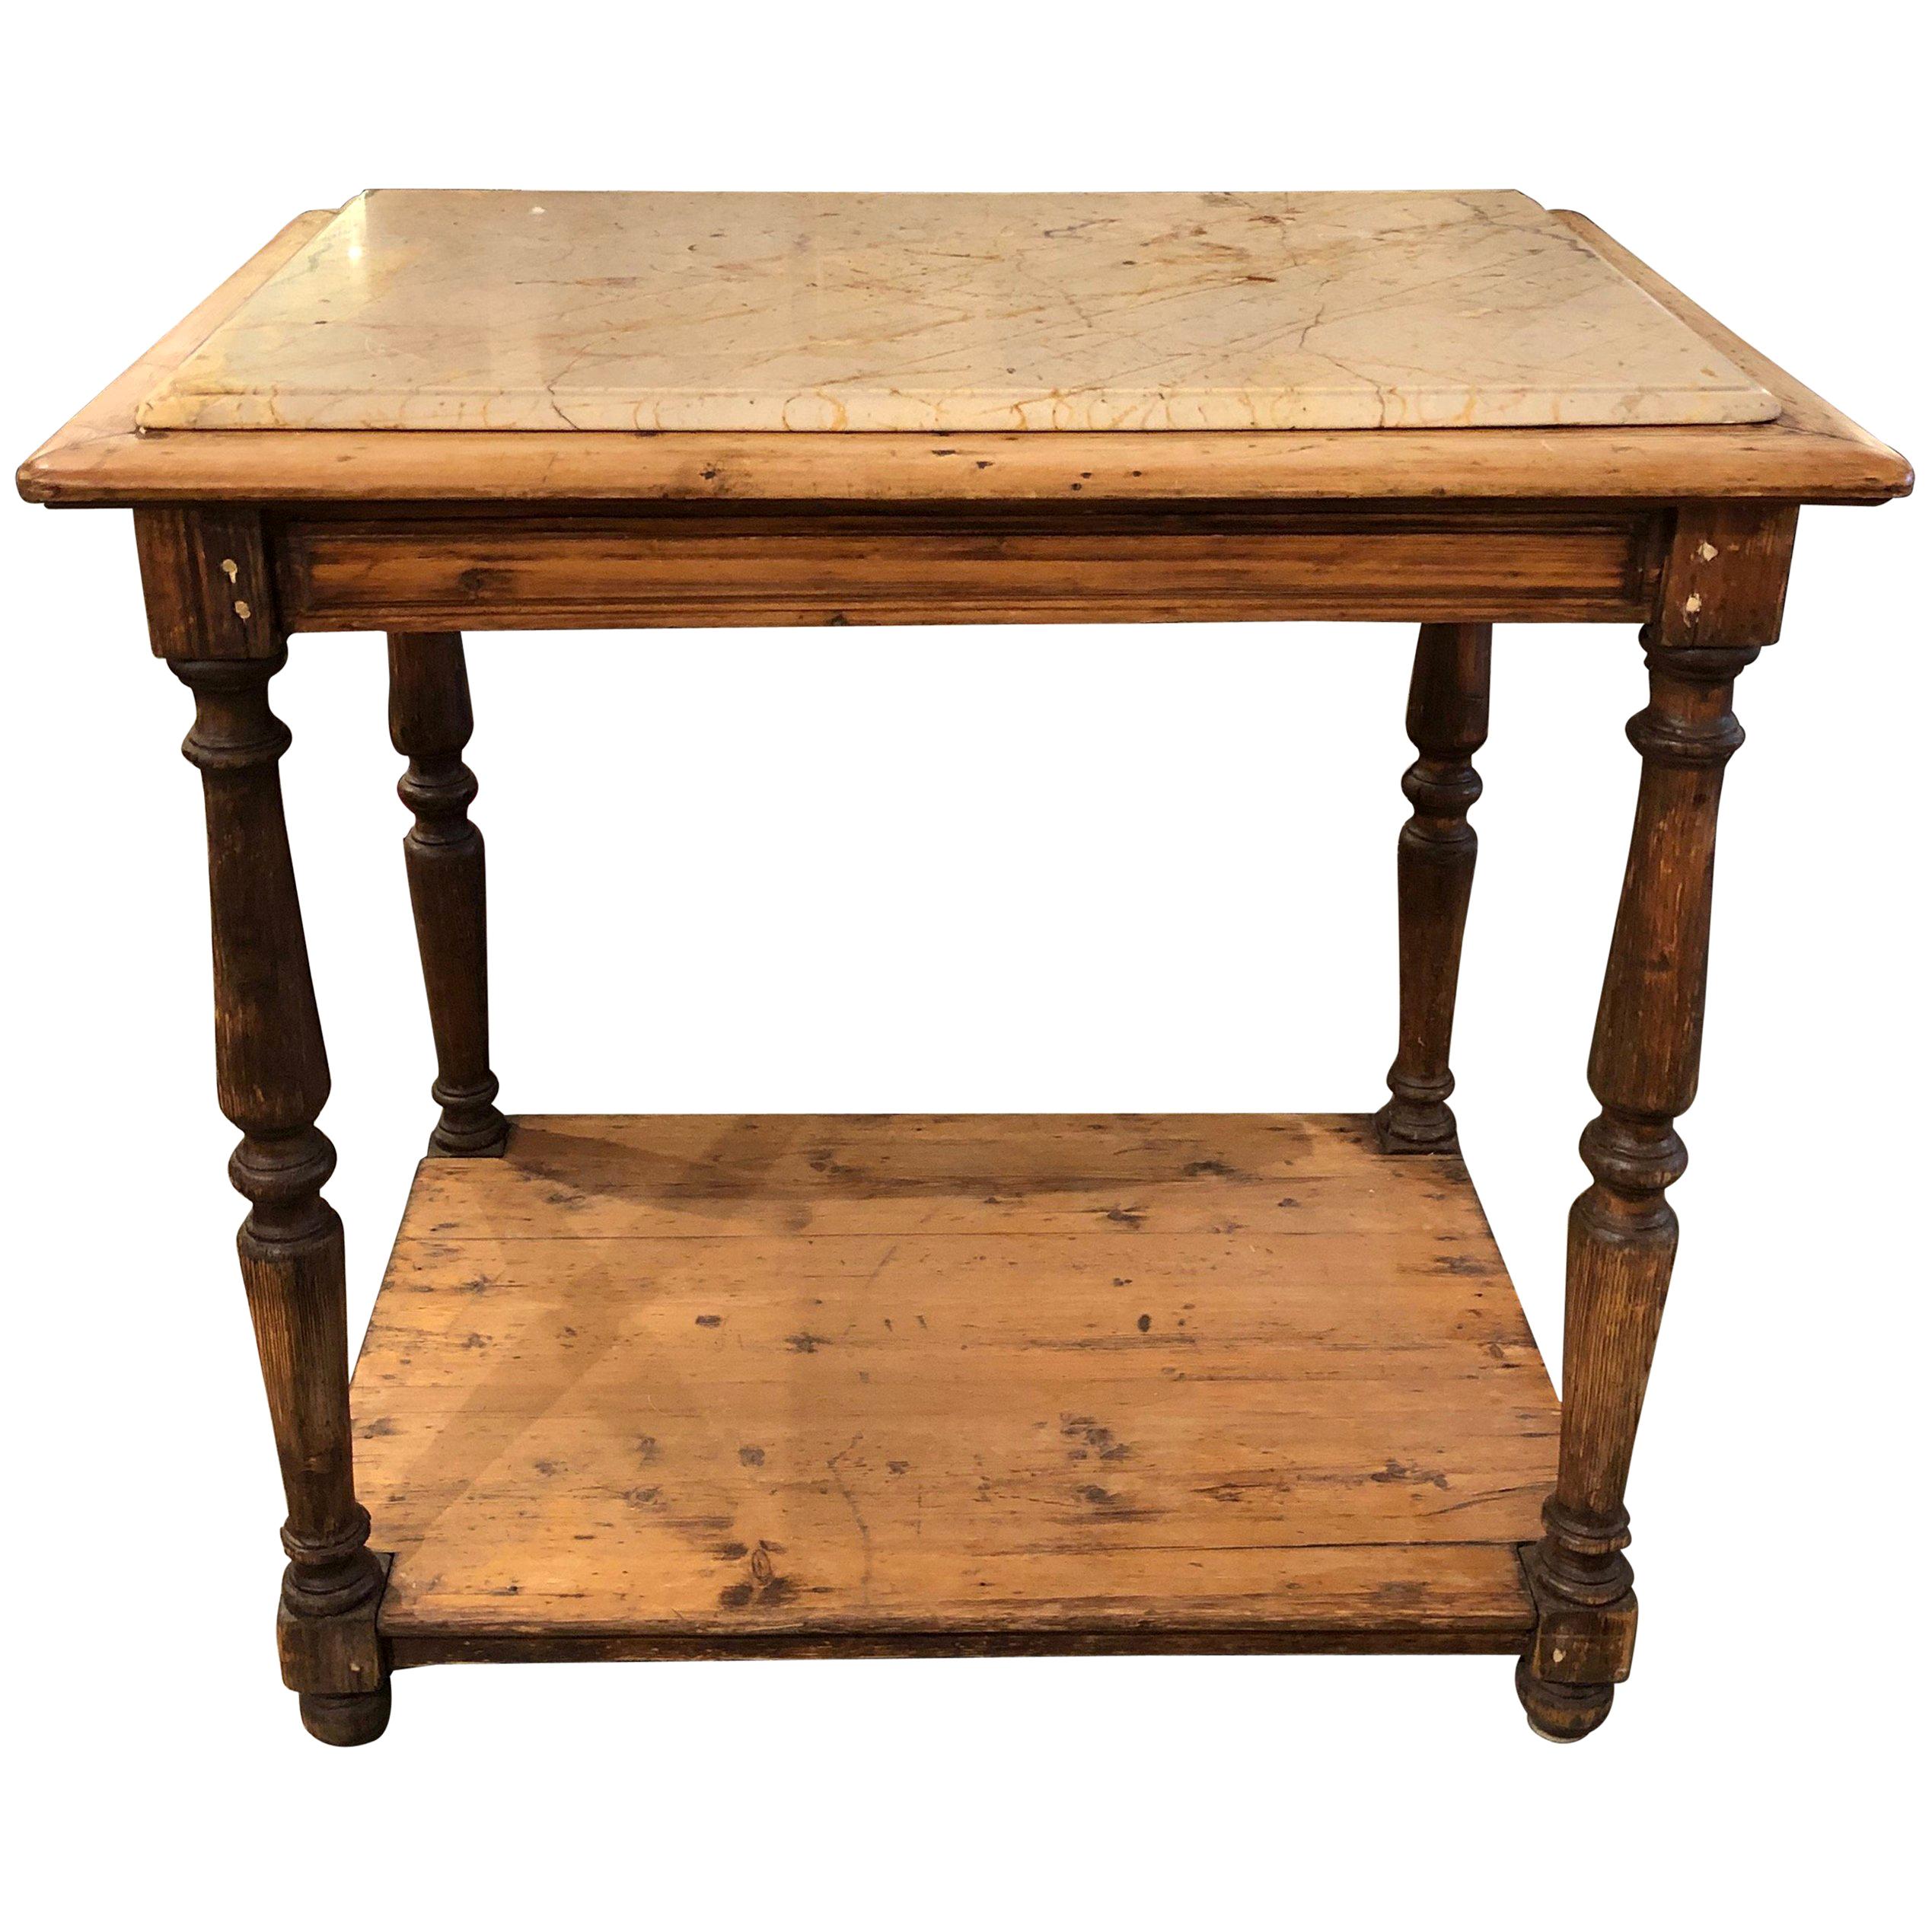 19th Century French Rustic Two-Tier Oak Pastry Table with Resting Marble Top For Sale